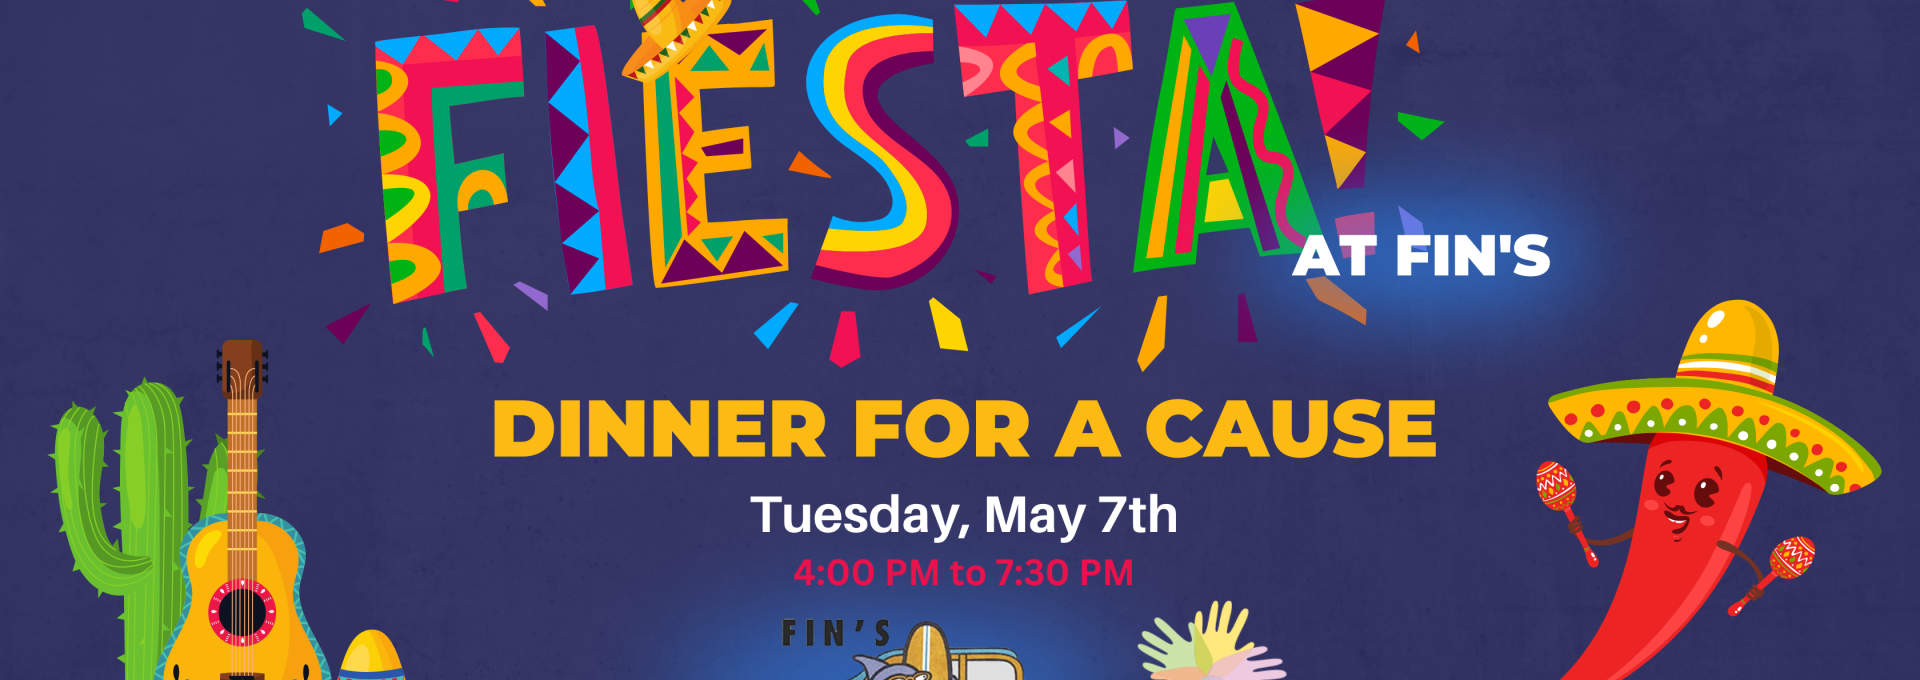 Fiesta at Fin's | May 7th | 4:00 PM to 7:30 PM